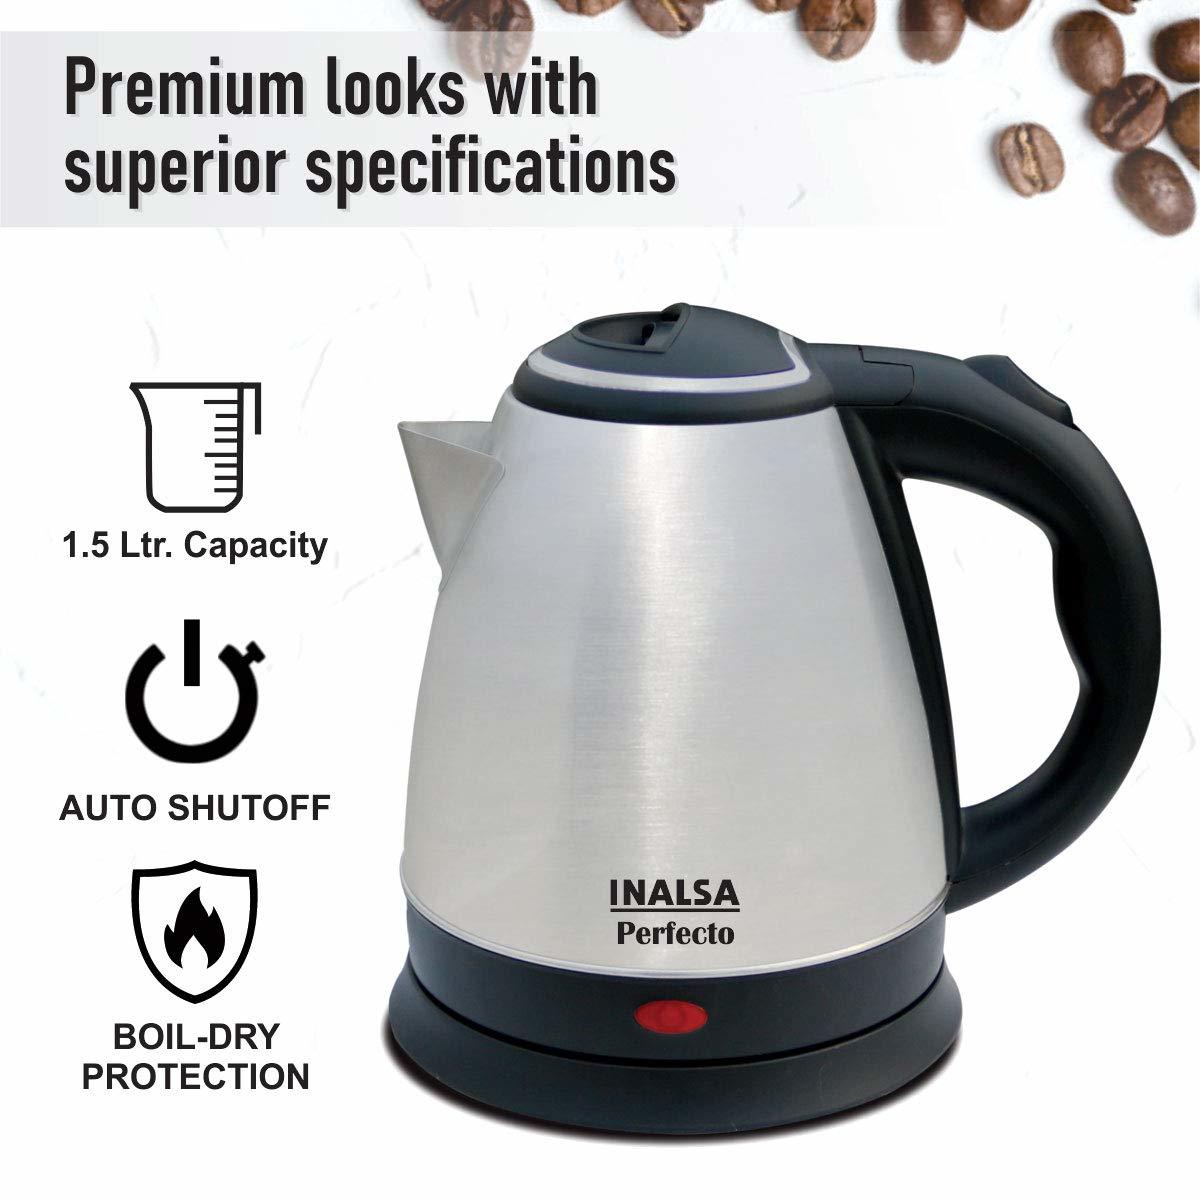 Inalsa Perfecto 1.5 Litre Electric Kettle